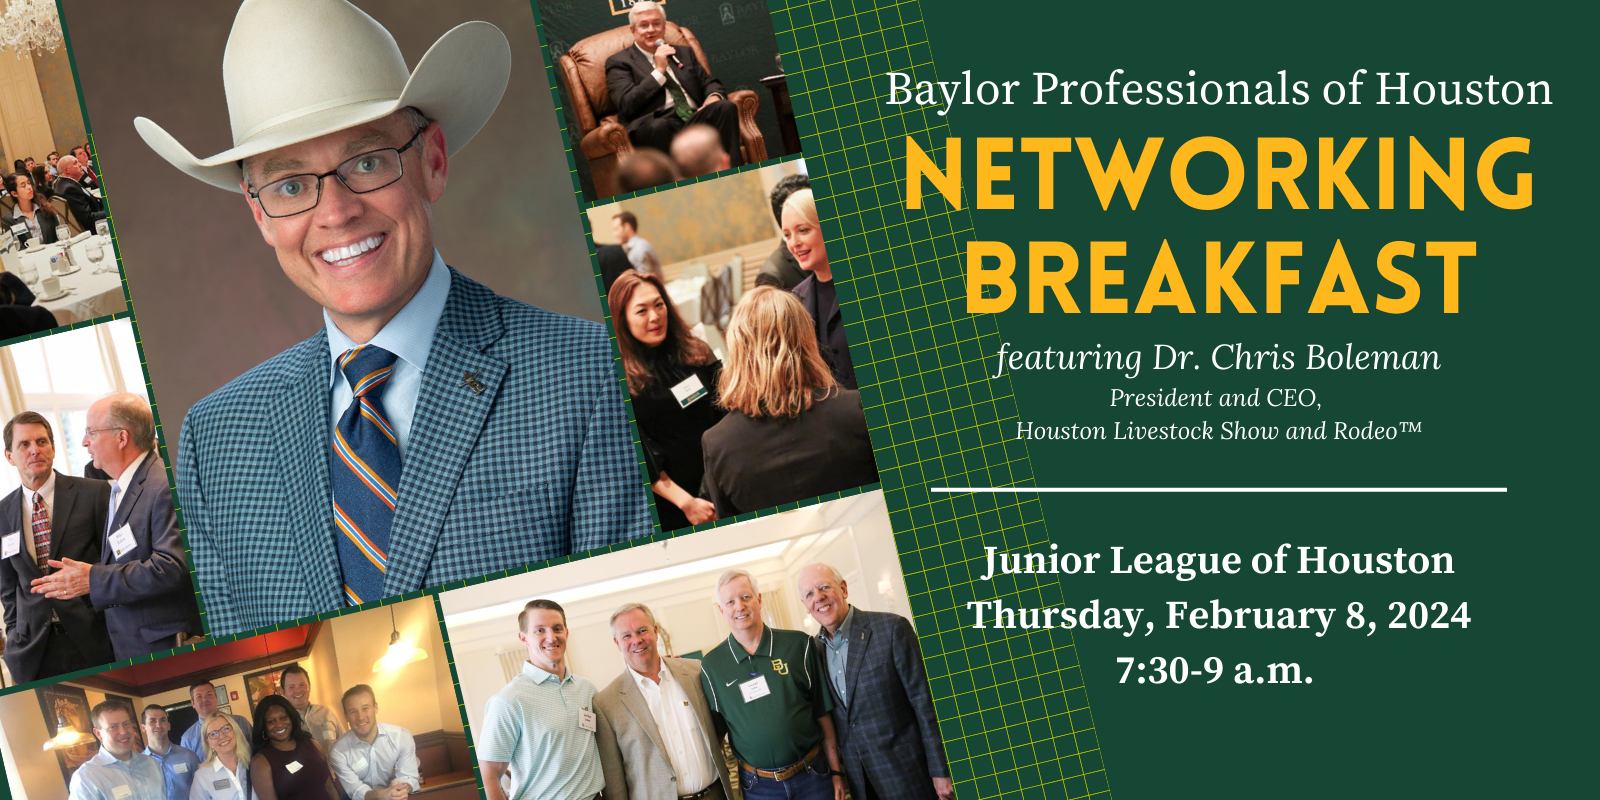 Baylor Professionals of Houston Networking Breakfast